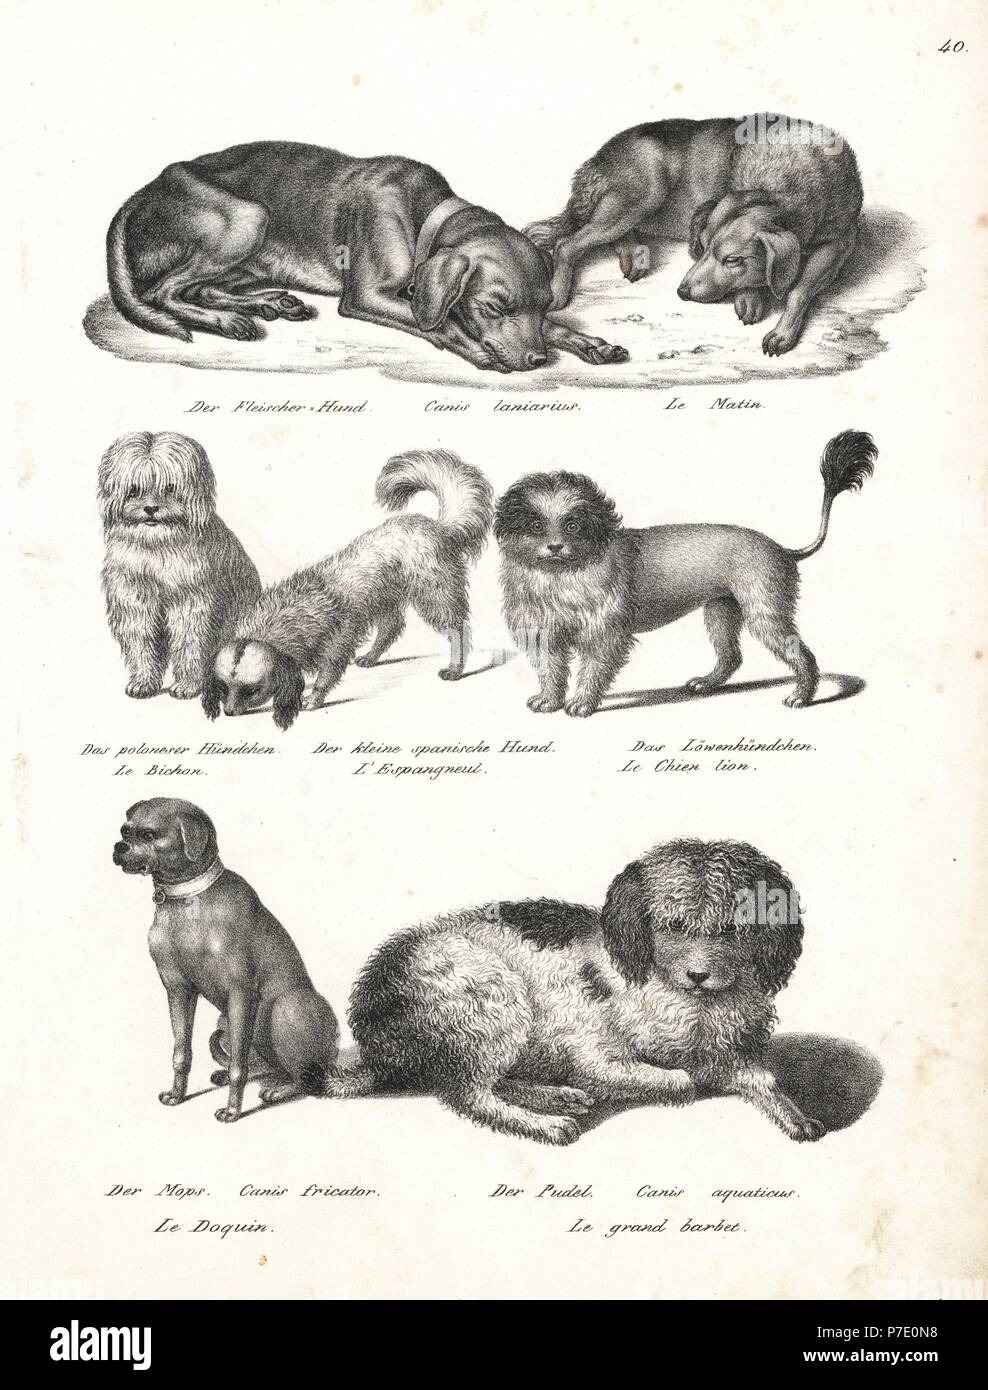 Lurcher or matin dog, Canis laniarius, Bichon, Spanish dog, Chow Chow, Pug dog, Canis fricator, and Poodle or water hunting dog, Canis aquaticus. Lithograph by Karl Joseph Brodtmann from Heinrich Rudolf Schinz's Illustrated Natural History of Men and Animals, 1836. Stock Photo